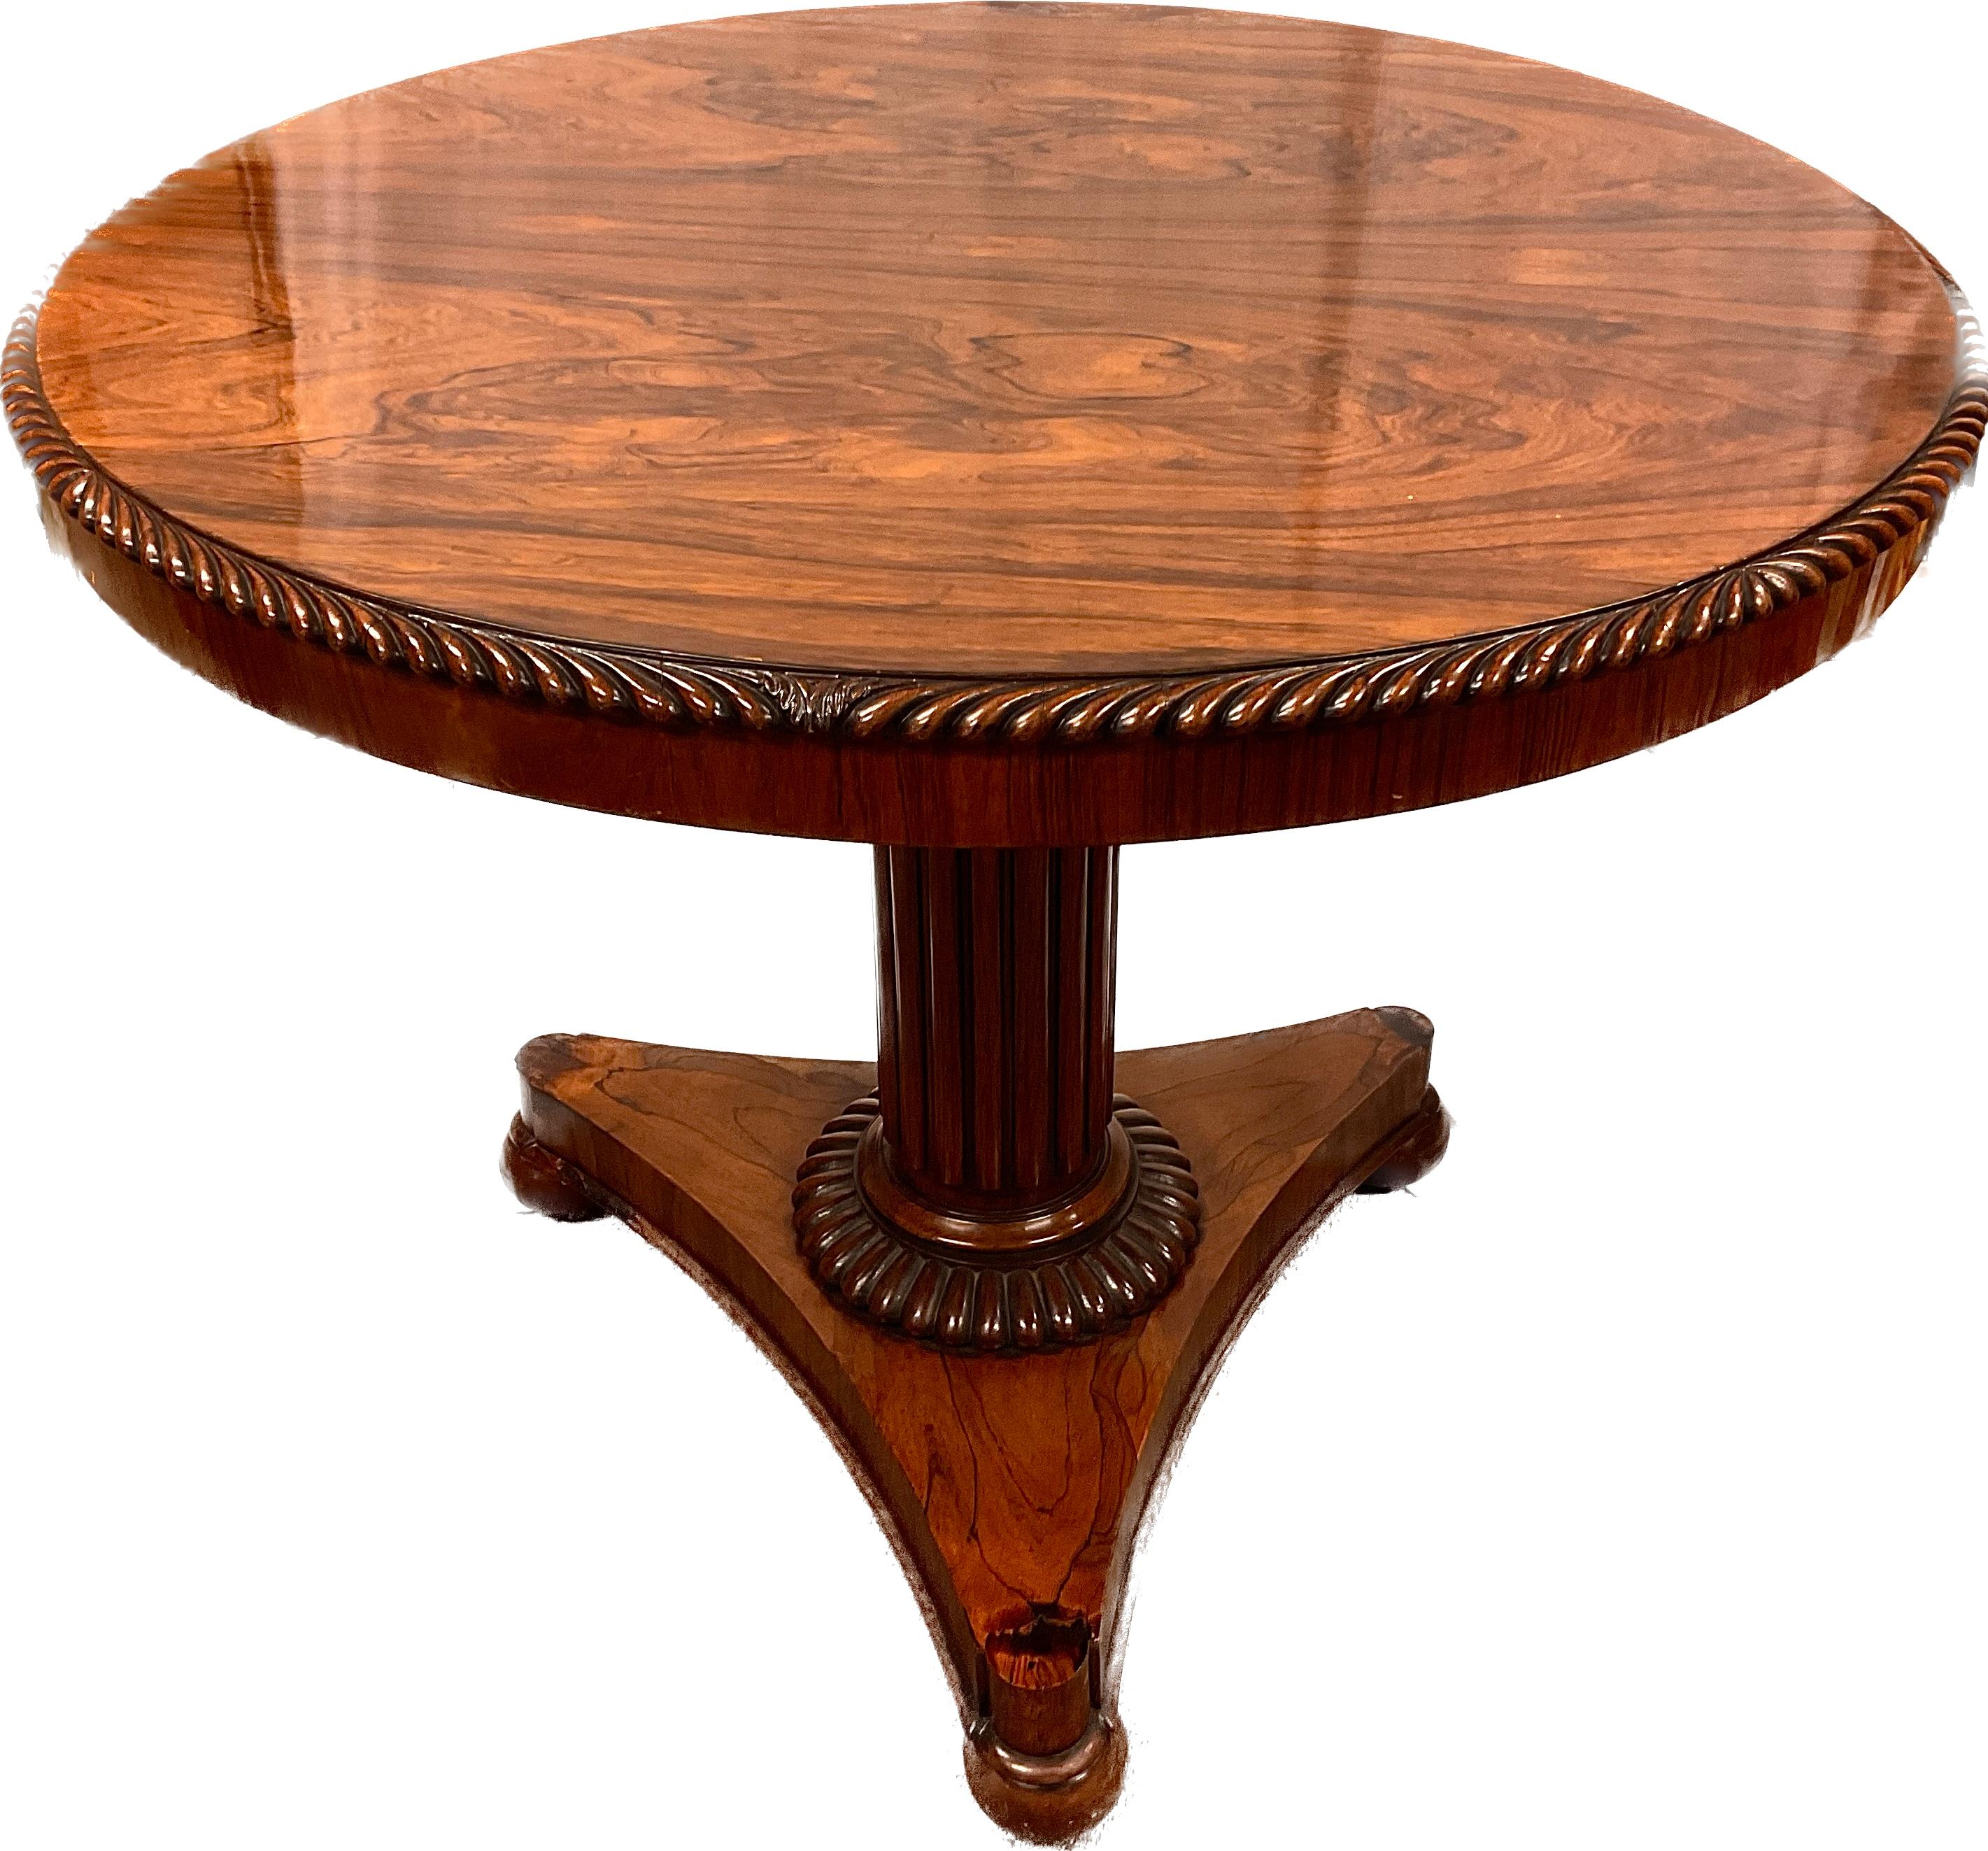 This is a very rare English Regency period Roulette table. The round rosewood top with gadroon edge, lifts off to reveal roulette wheel. Foliate motif black and white bone center panel, alternating red and black chapter ring with additional 0 and 00